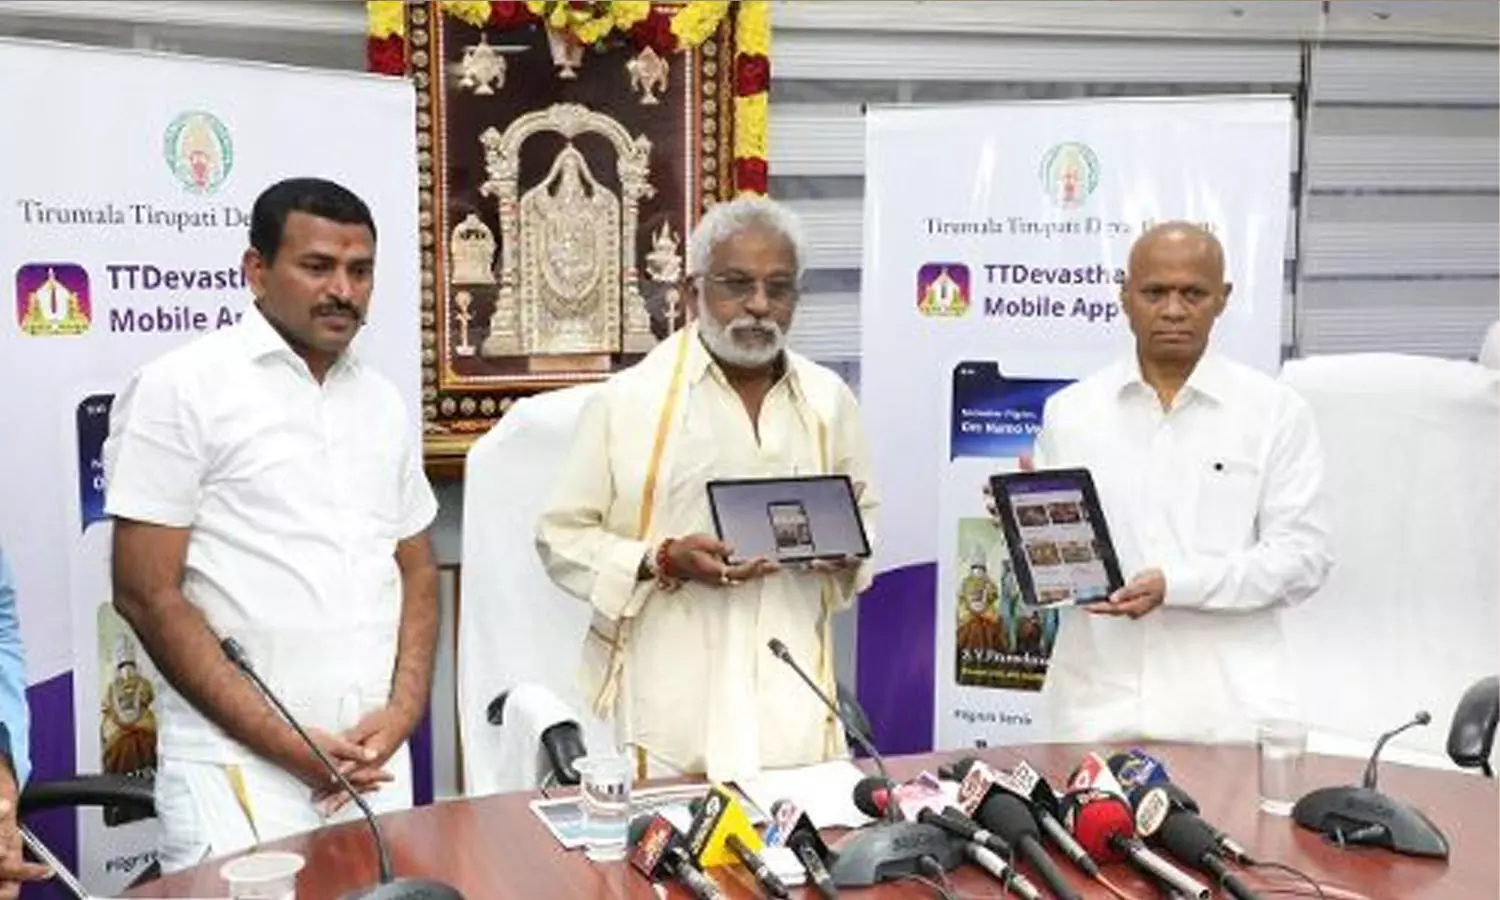 TTD launches new mobile app with upgraded features for devotees